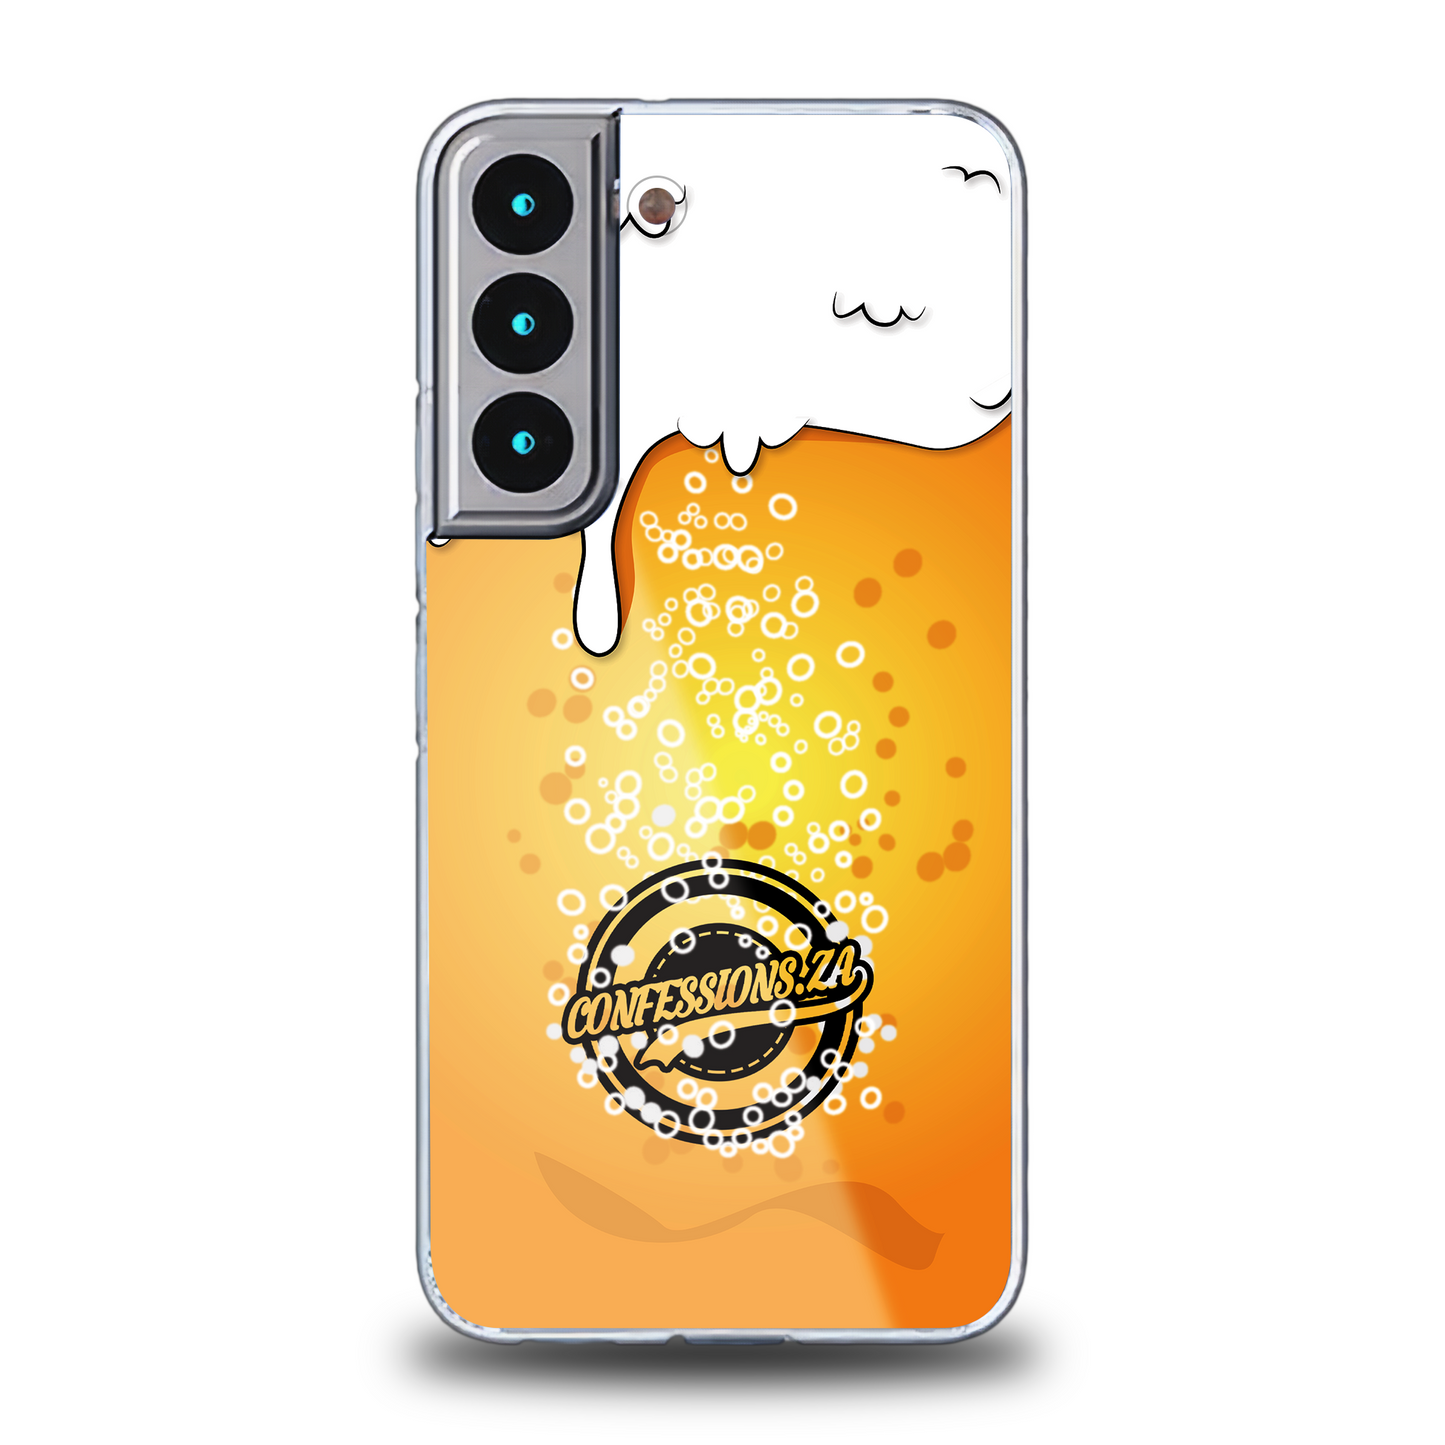 Confessions.za beer phone case - Samsung